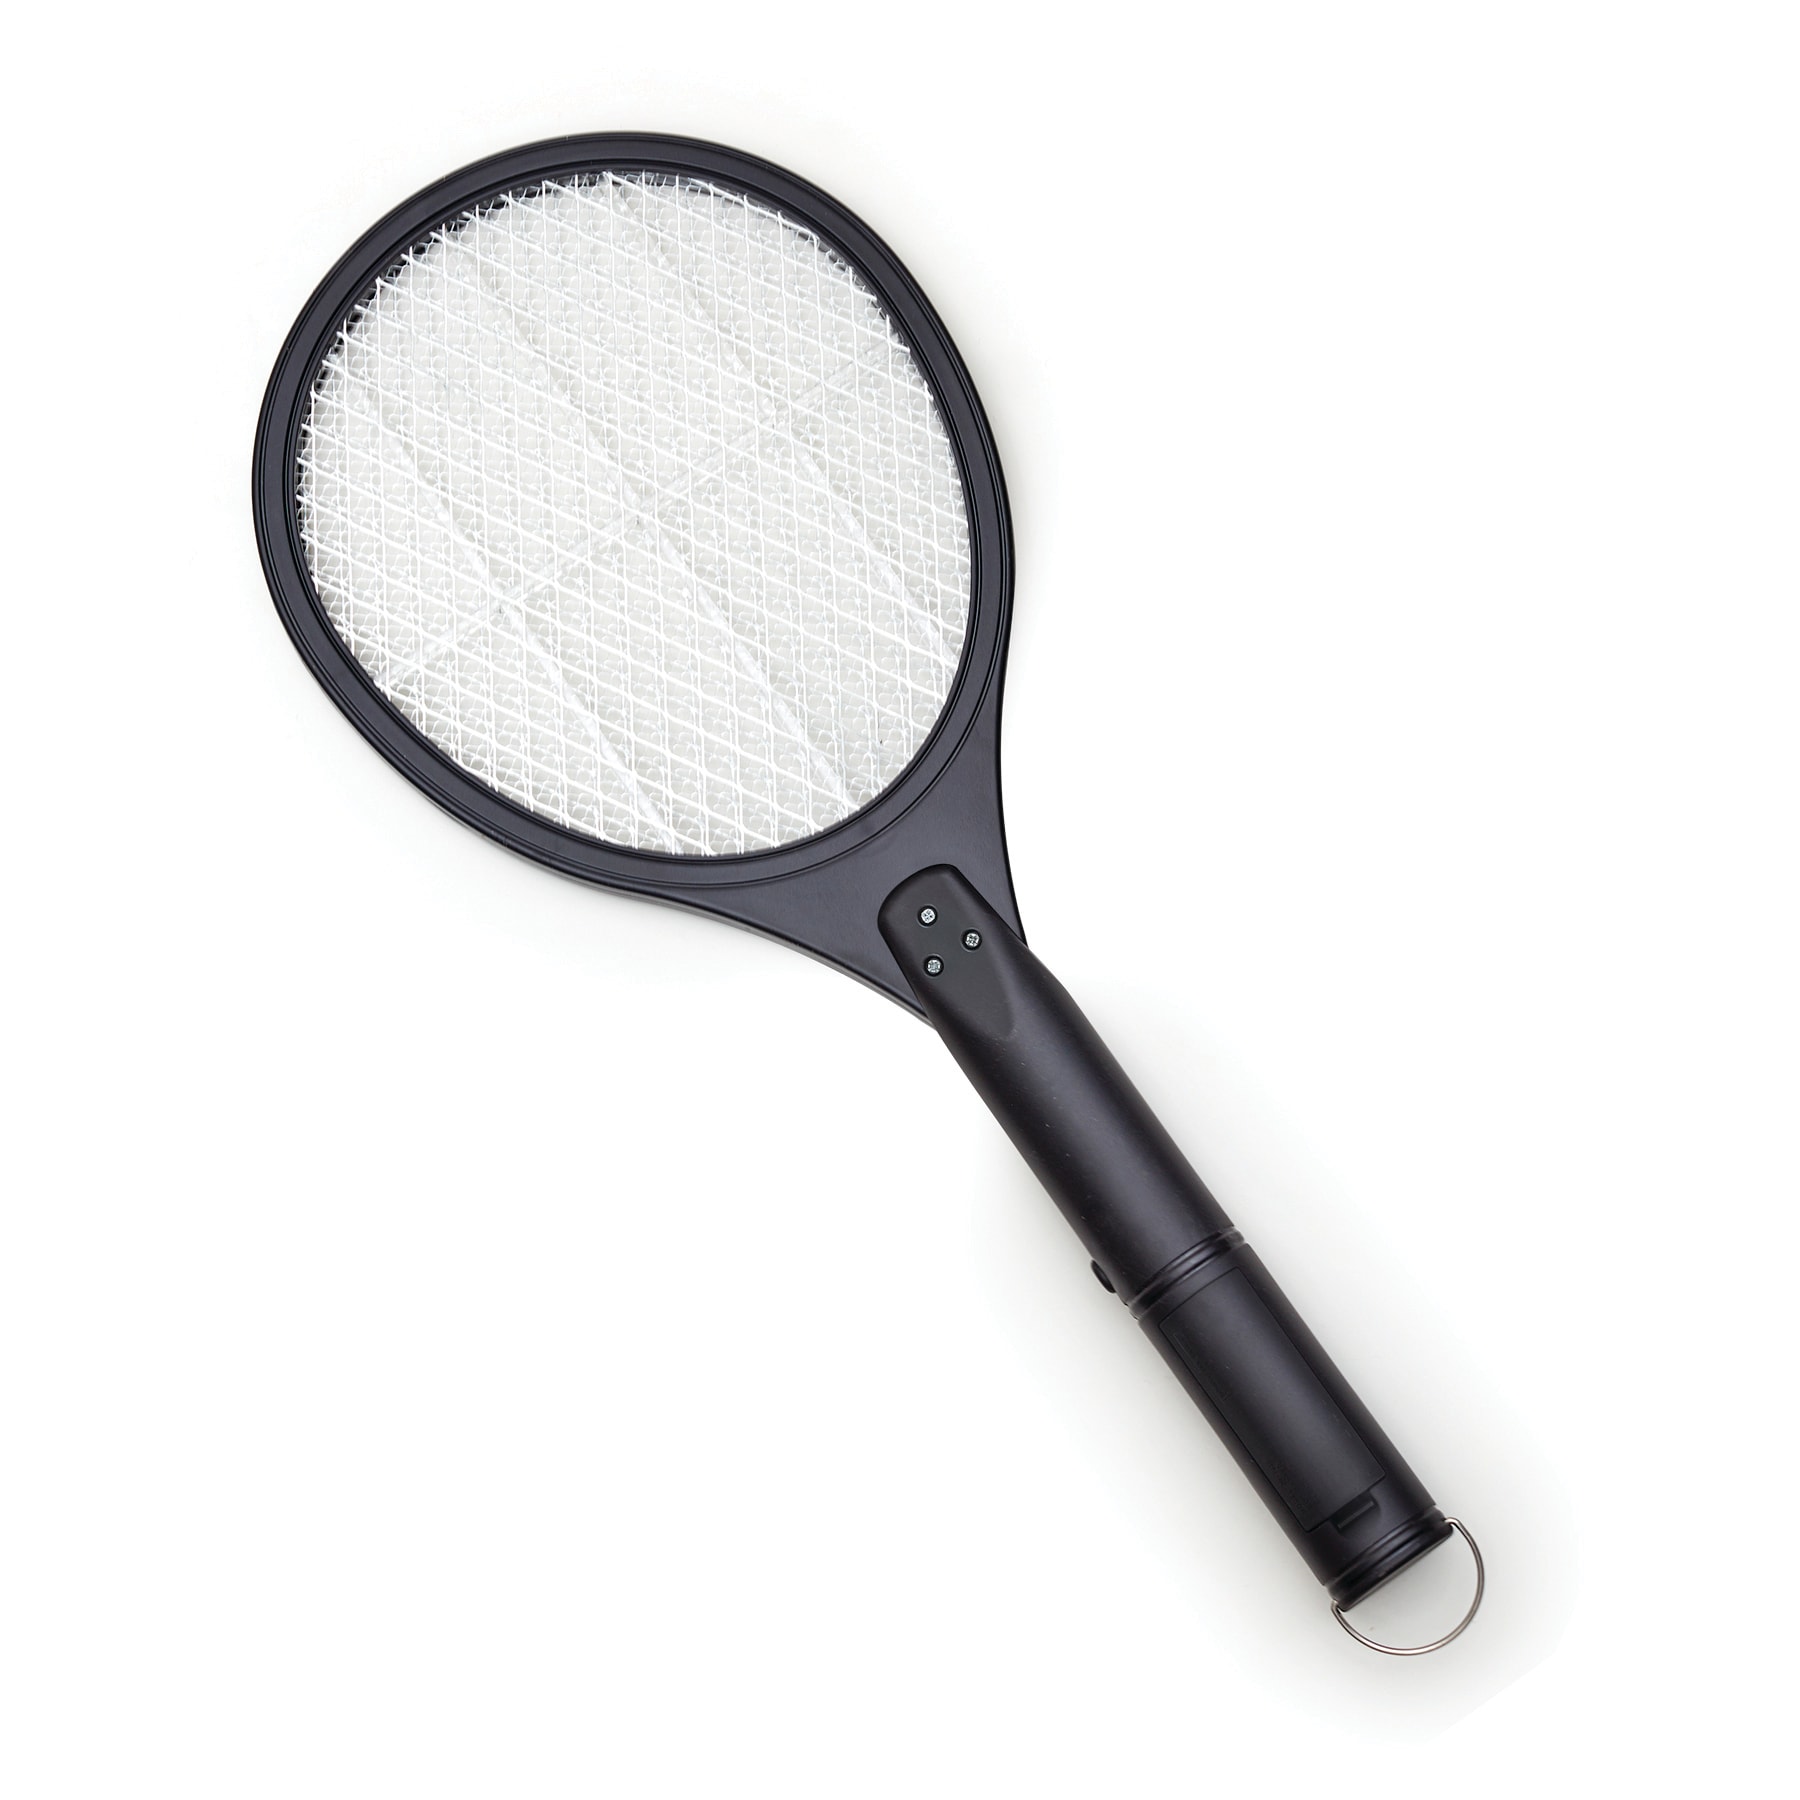 Black + Decker Electric Fly Swatter- Fly Zapper- Tennis Bug Zapper Racket-  Battery Powered Zapper- Electric Mosquito Swatter- Handheld Indoor &  Outdoor- Non Toxic, Safe for Humans & Pets